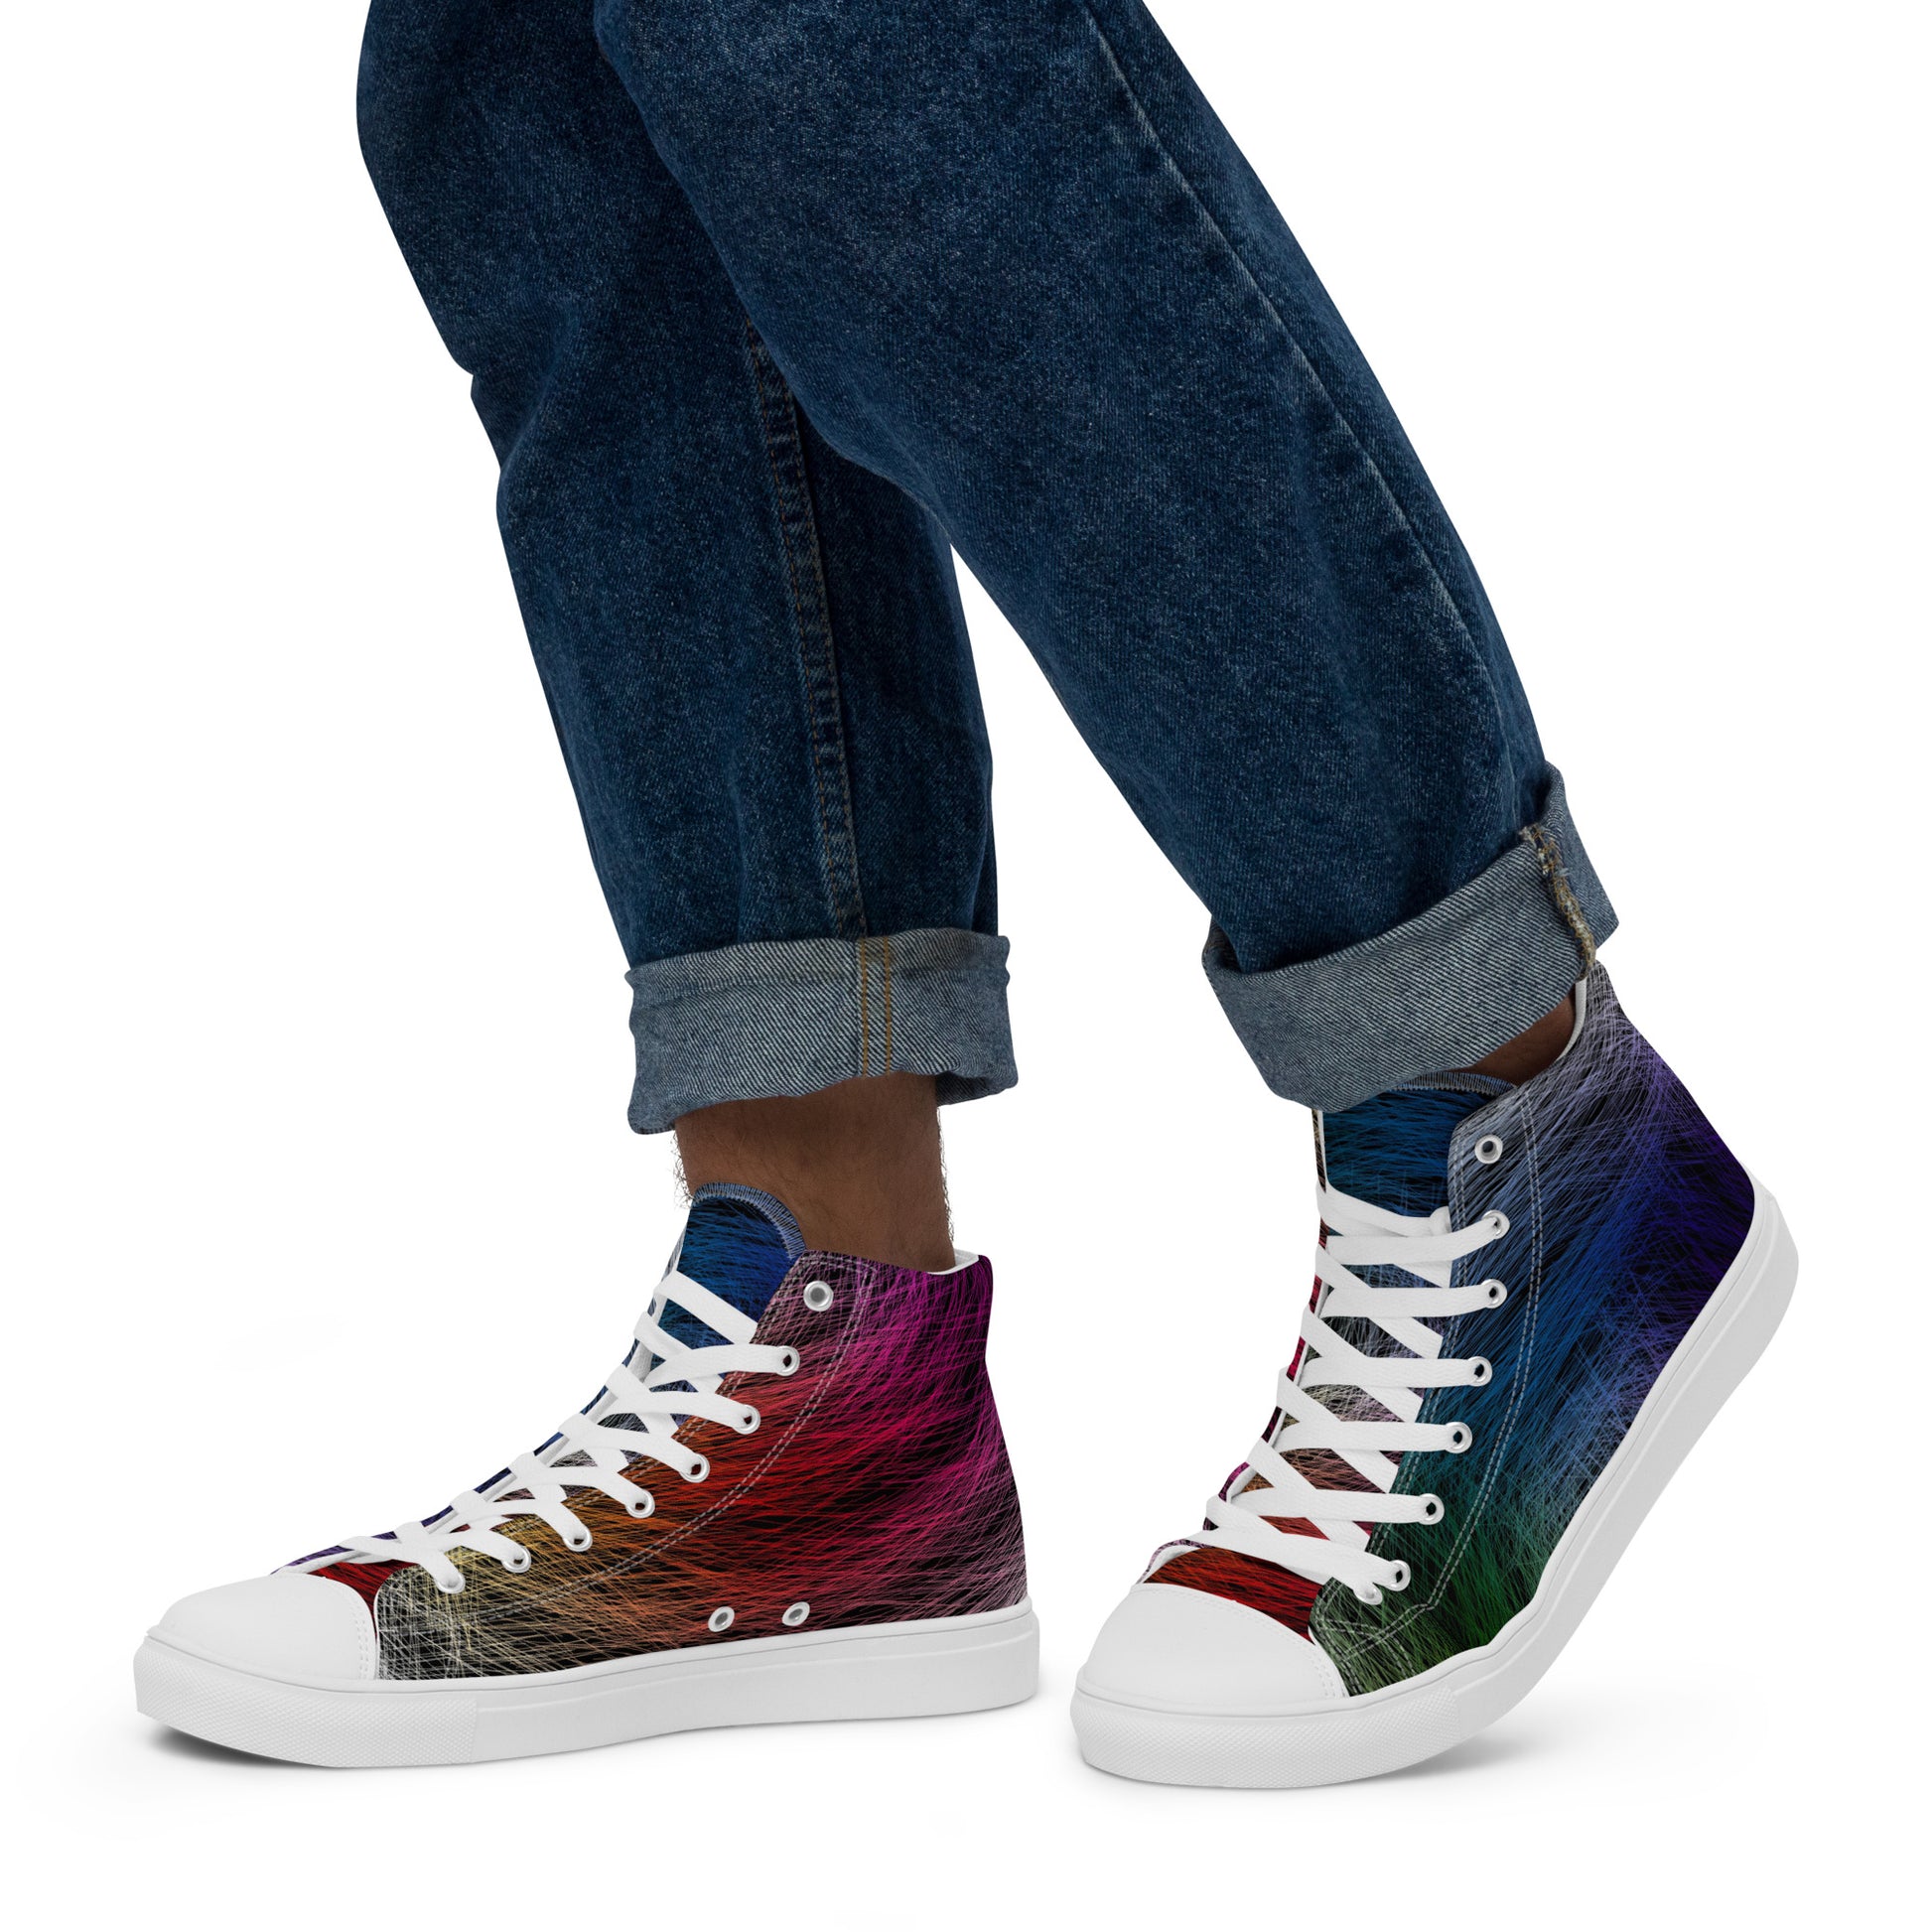 Wild Rainbow Men’s High Top Canvas Shoes | Casual LGBTQ+ Shoes | Stylish Festival Sneakers | Pride Shoes | Lace Up Sneakers | - Comfortable Culture - Shoes - Comfortable Culture